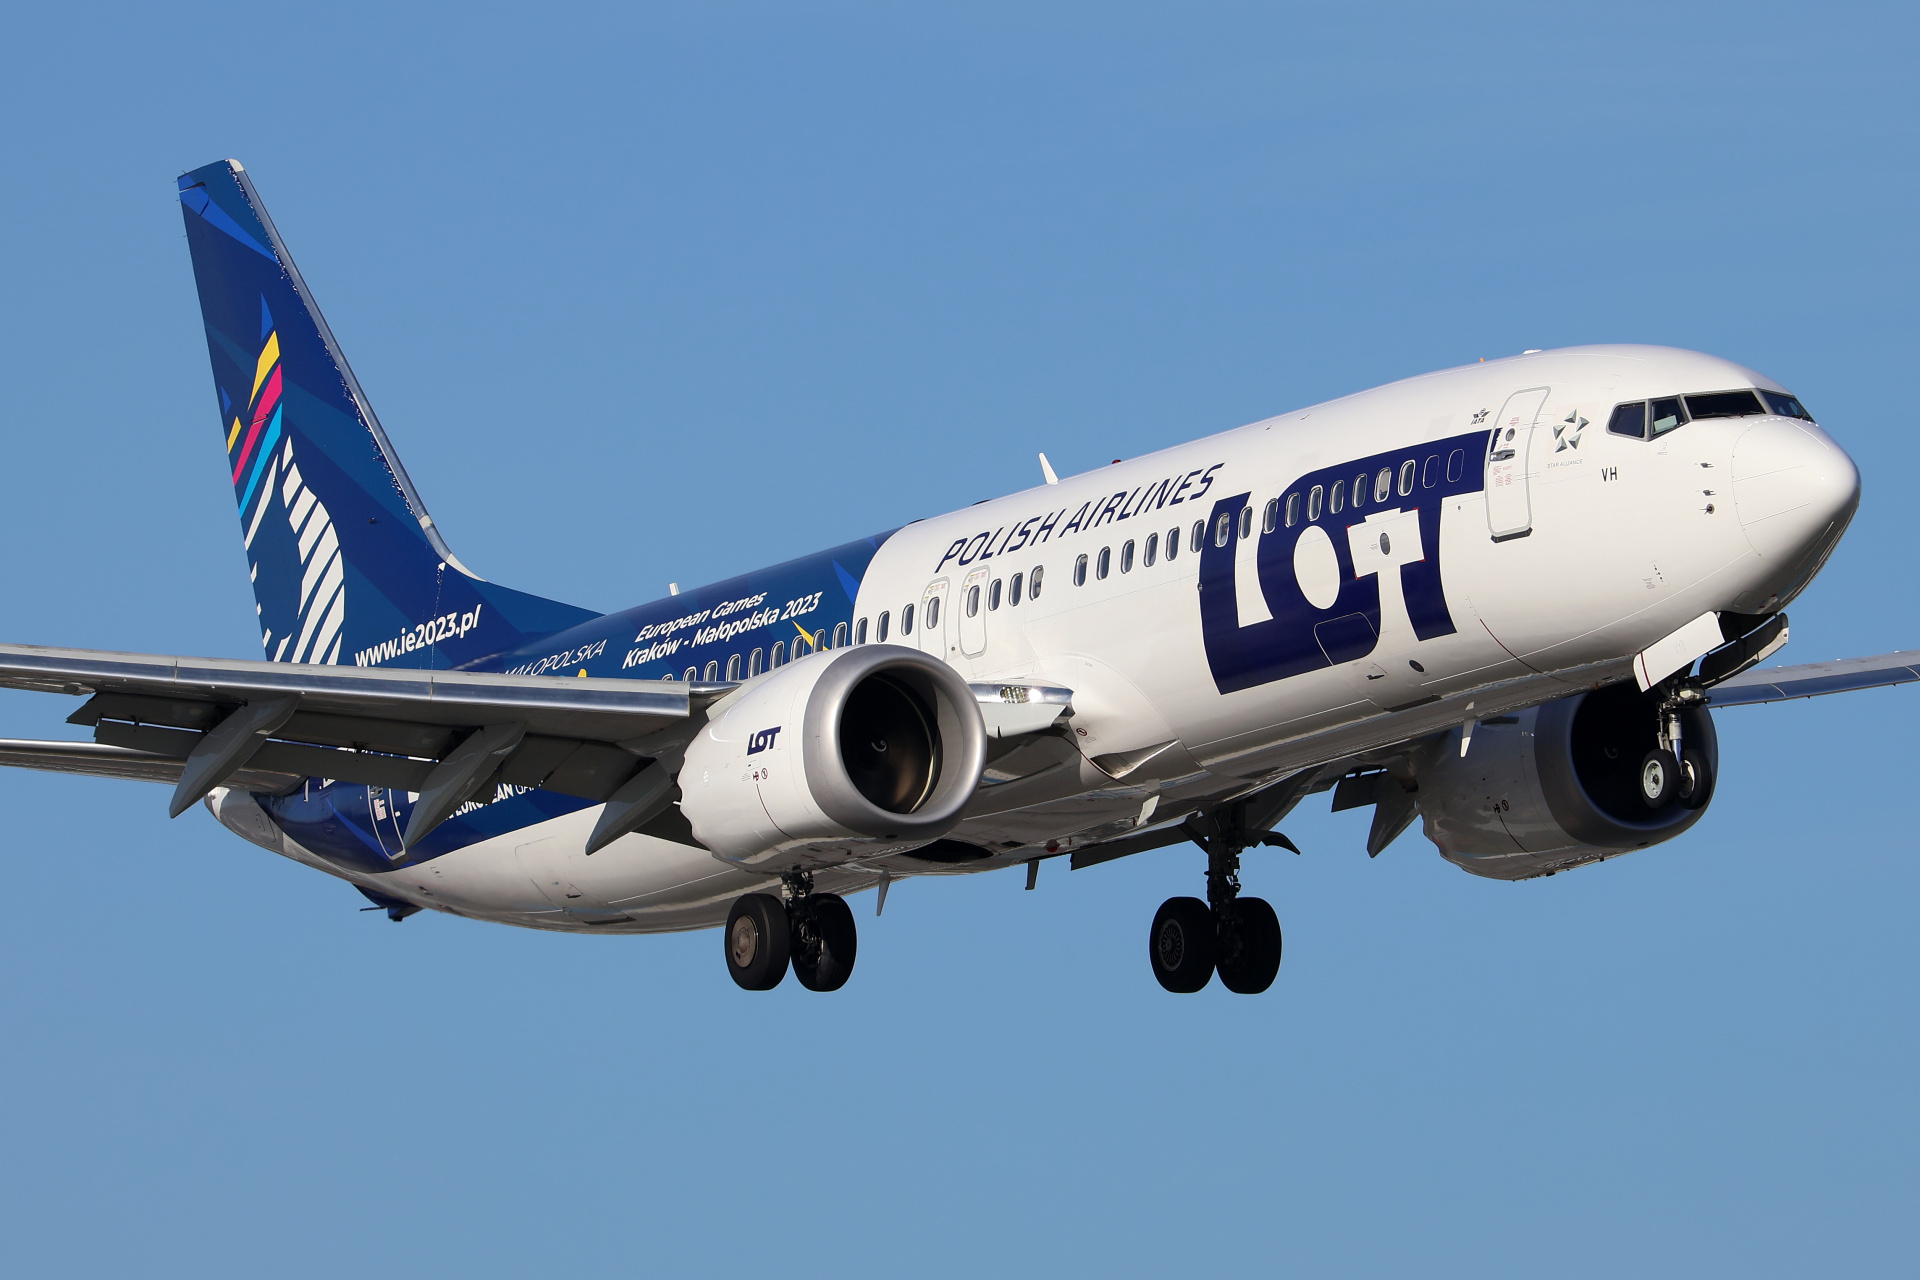 SP-LVH (3rd European Games 2023 livery) (Aircraft » EPWA Spotting » Boeing 737-8 MAX » LOT Polish Airlines)